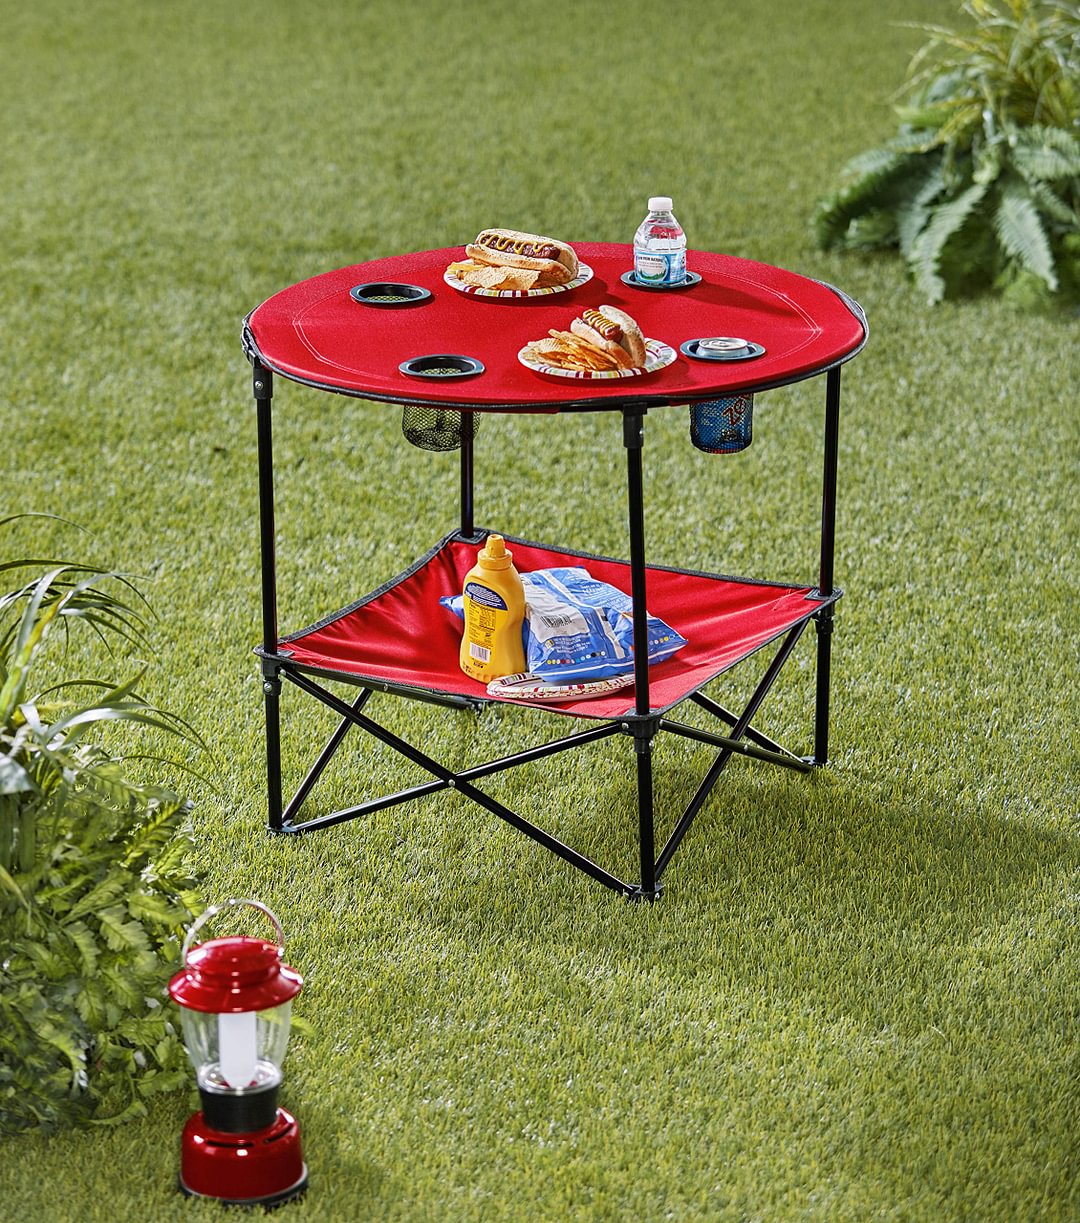 Portable Folding Picnic Table with Bench Storage for Tailgating